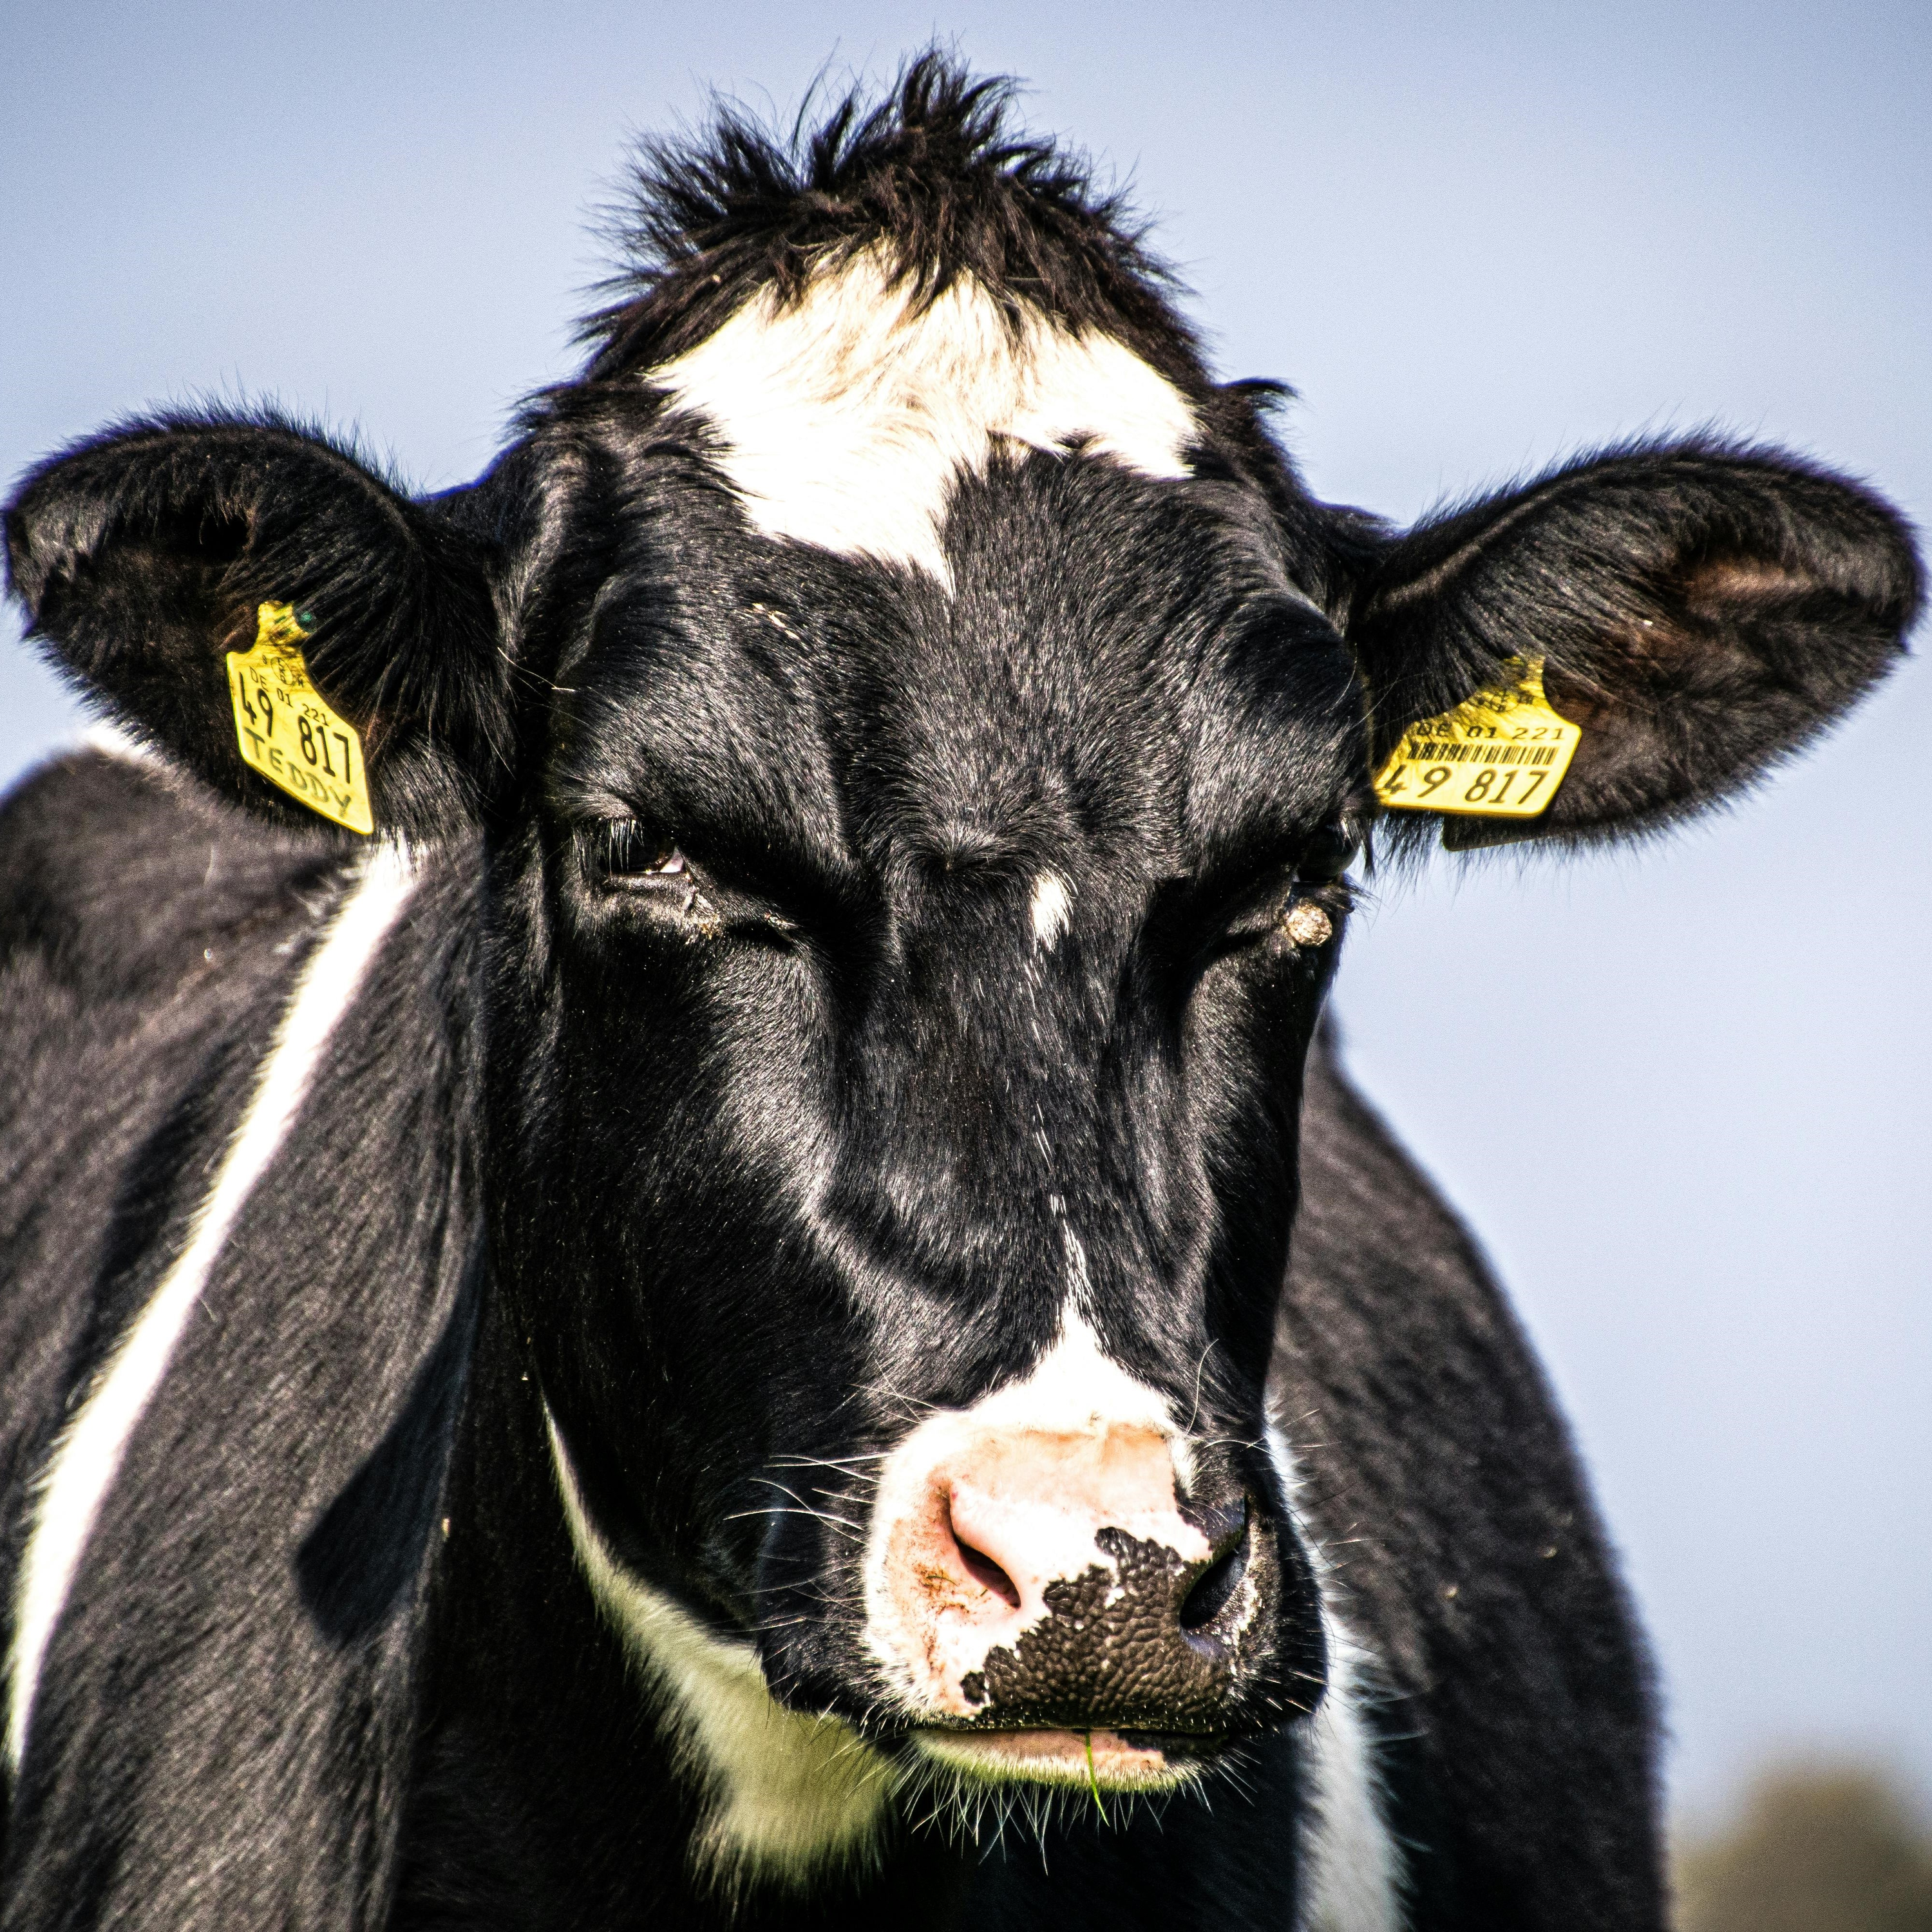 Confidence remains high among dairy farmers